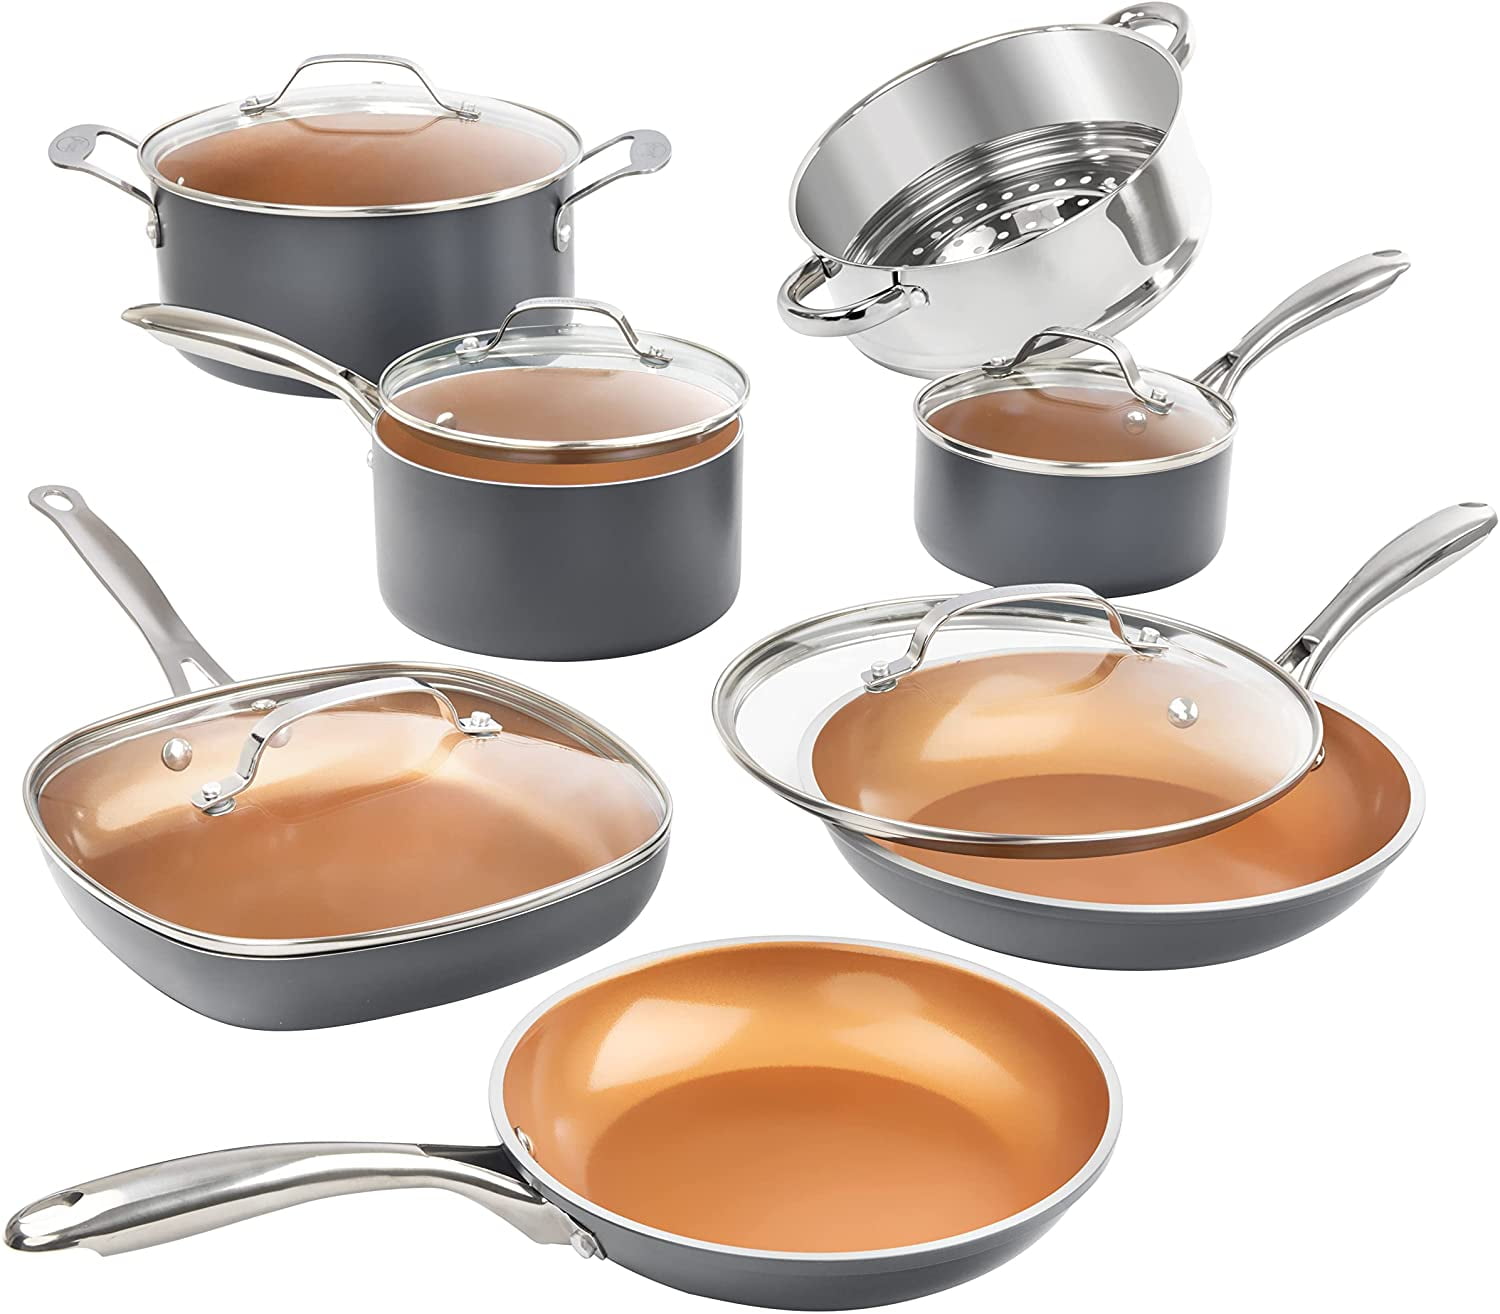 Gotham Steel Diamond 12 Piece Cookware Set, Non-Stick Copper Coating, Includes Skillets, Frying Pans and Stock Pots, Dishwasher and Oven Safe, Graphite